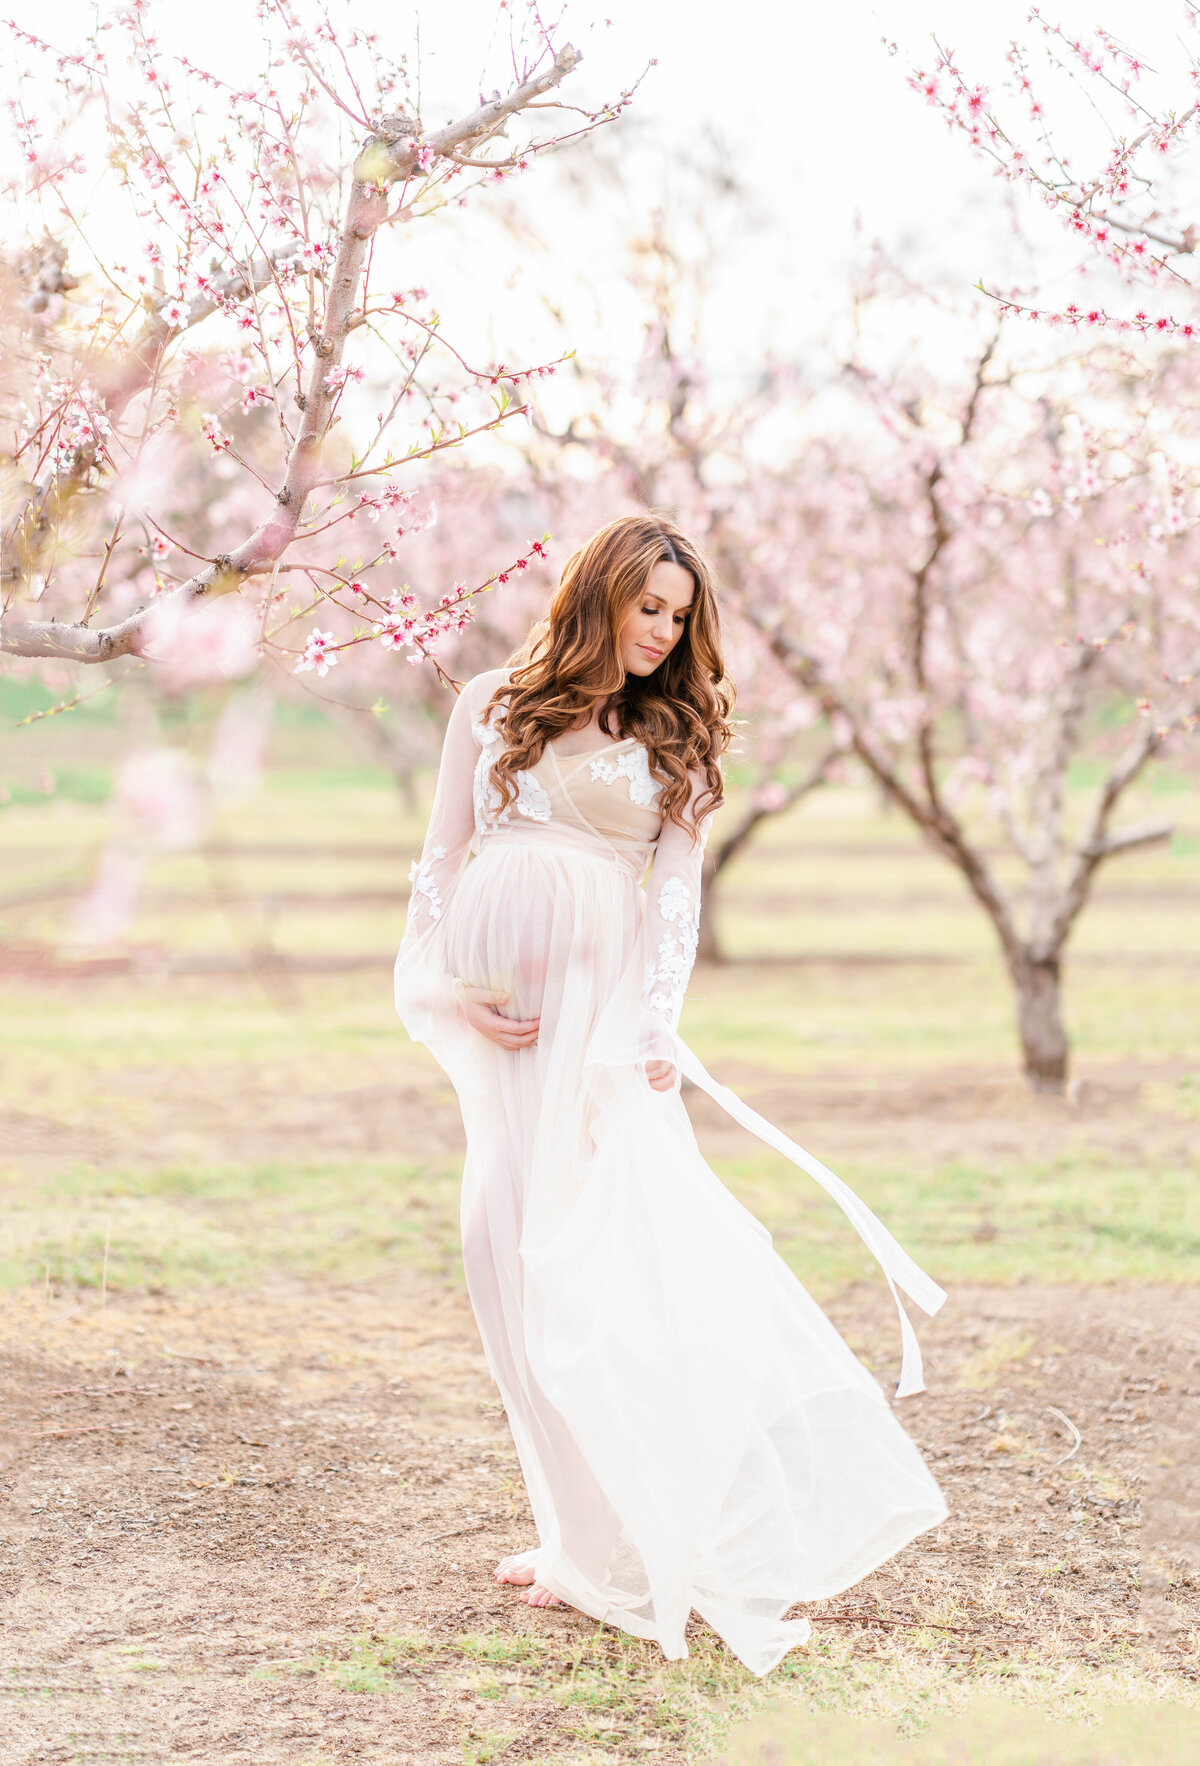 An expecting mother dressed in a white gown stands in a cherry blossom field caressing her beautiful bump photographed by Bay area photographer, Light Livin Photography.